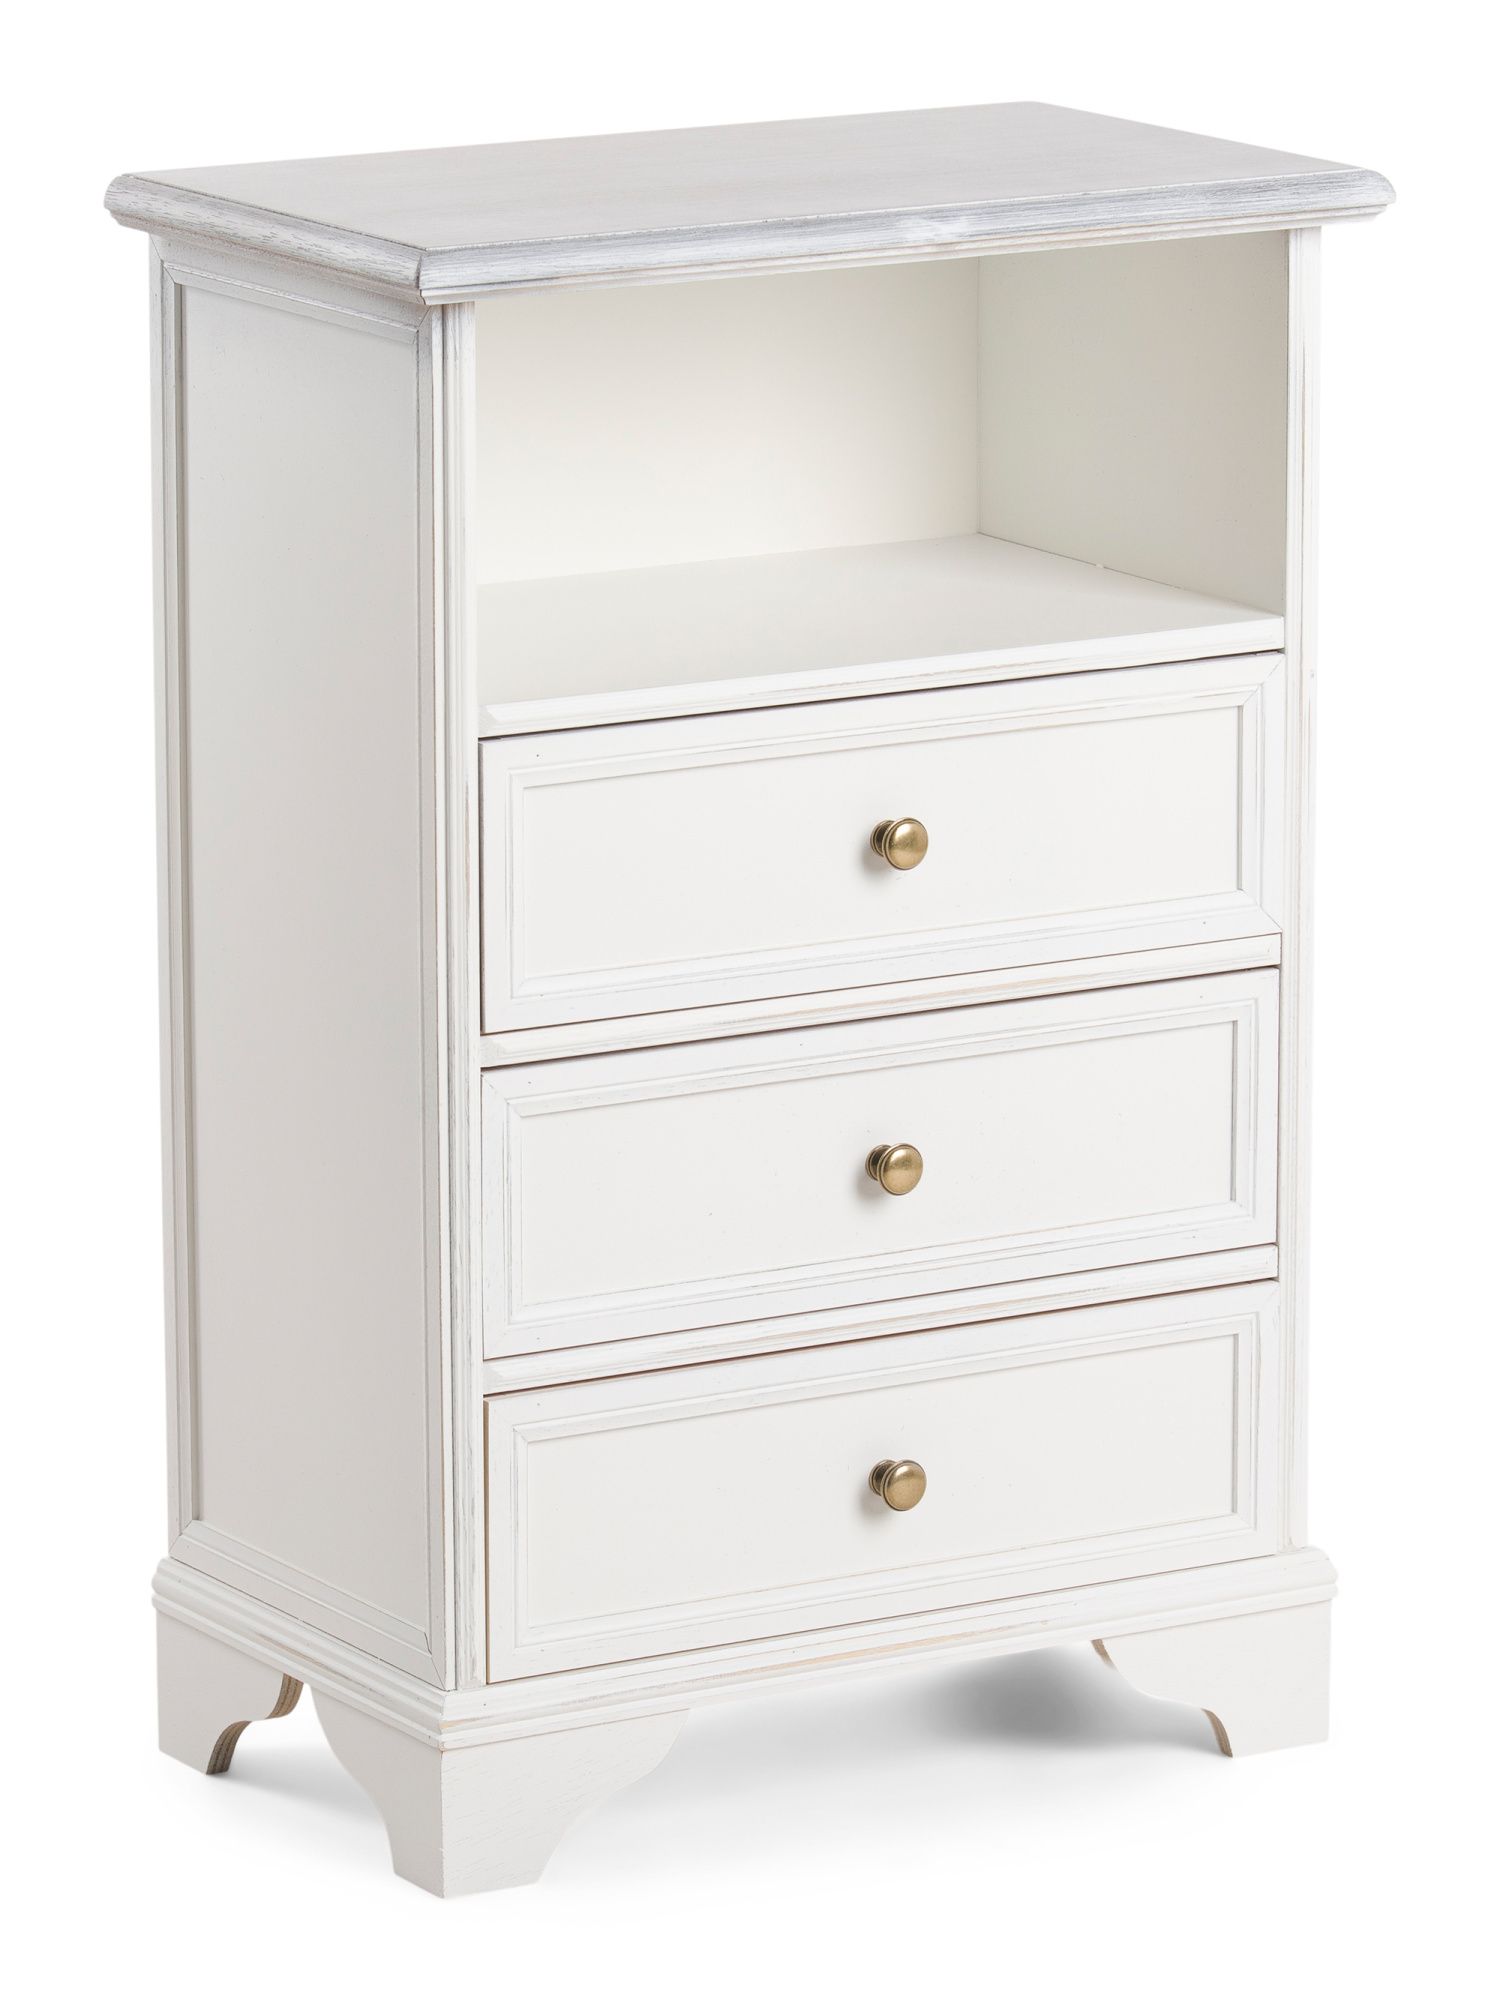 Made In Italy 3 Drawer Nightstand | TJ Maxx